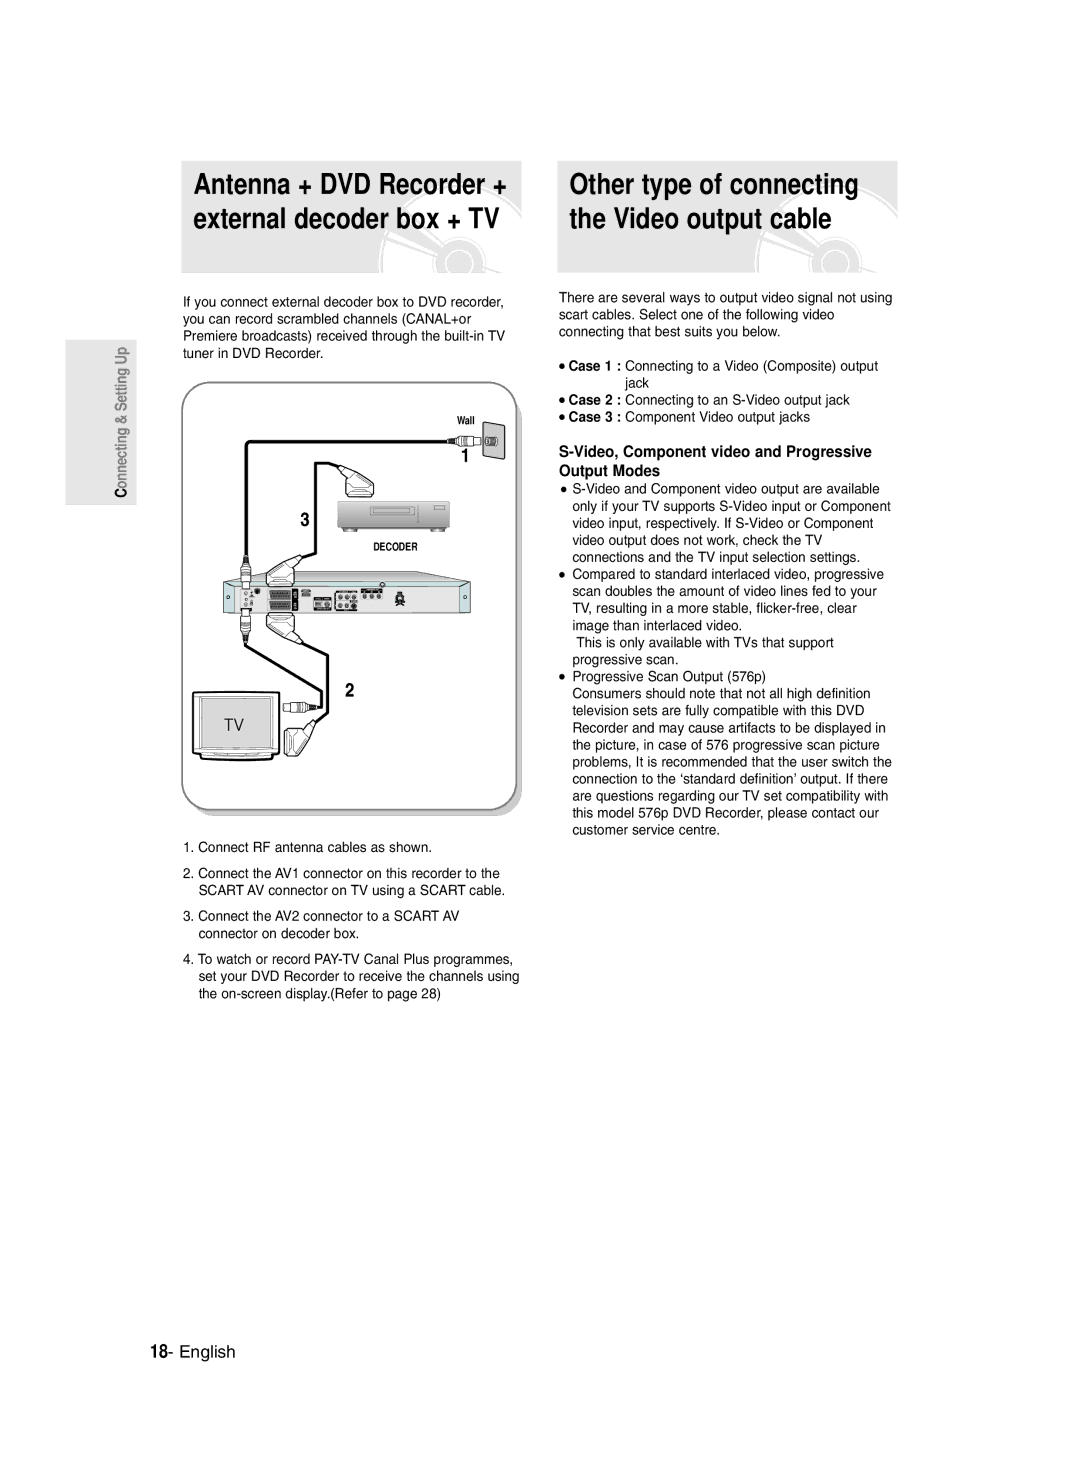 Samsung DVD-R135/XEB, DVD-R135/EUR, DVD-R135/XEH manual Video output cable, Connect RF antenna cables as shown 